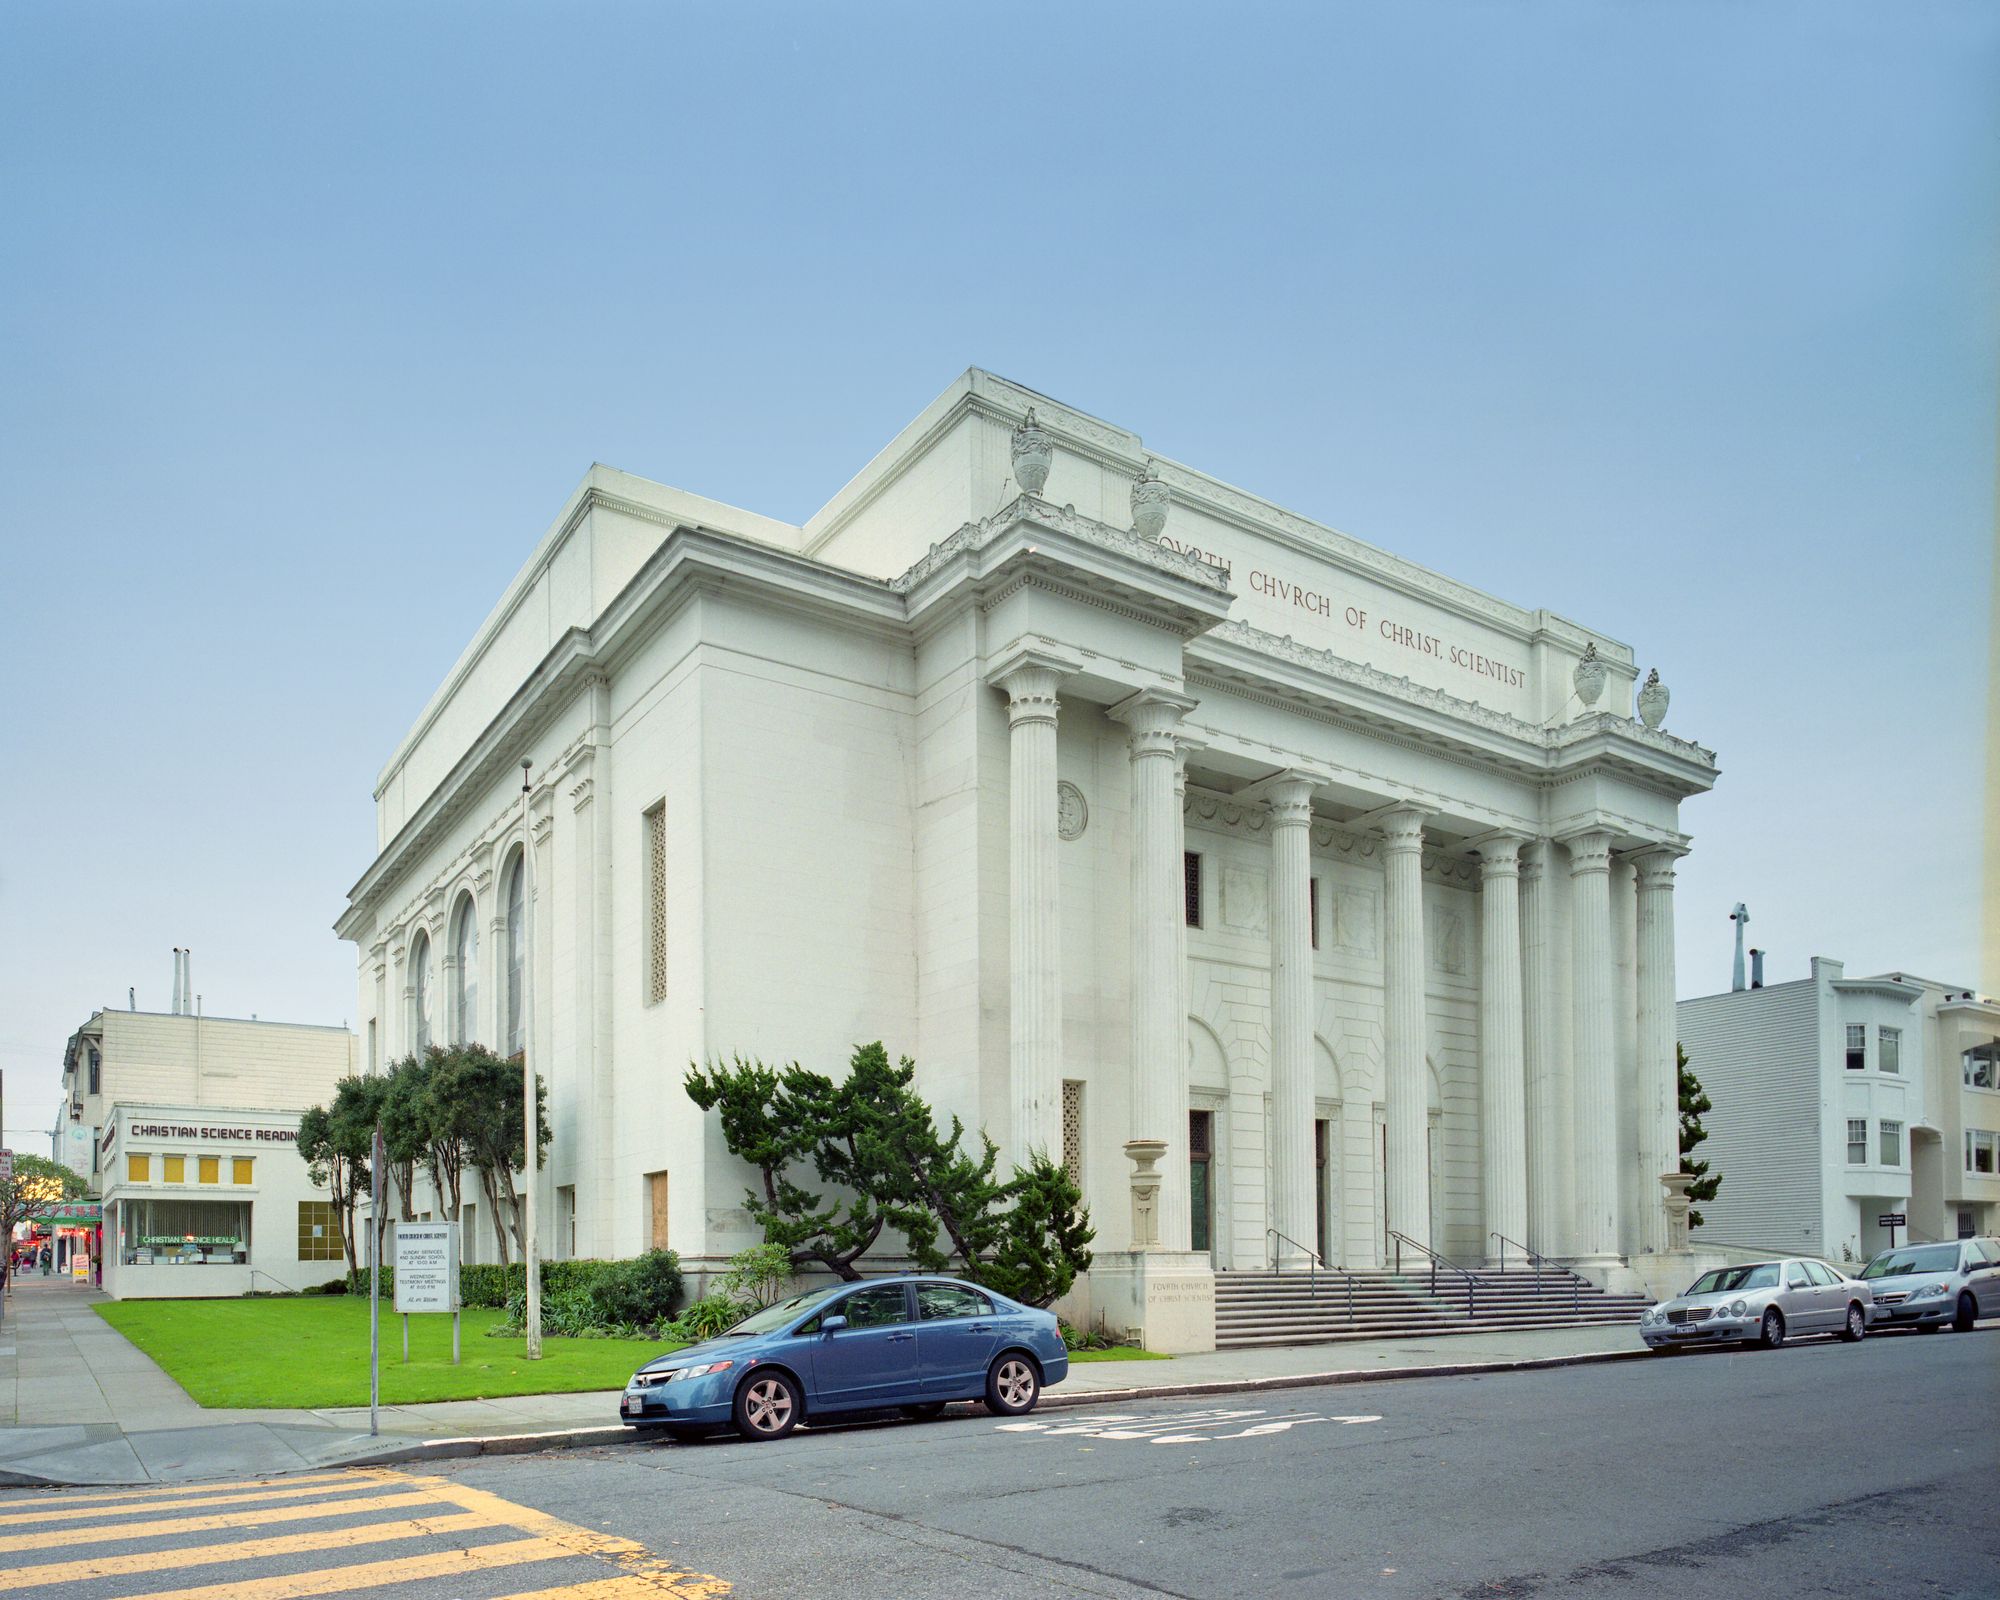 A white neoclassical building with some cars parked in front.